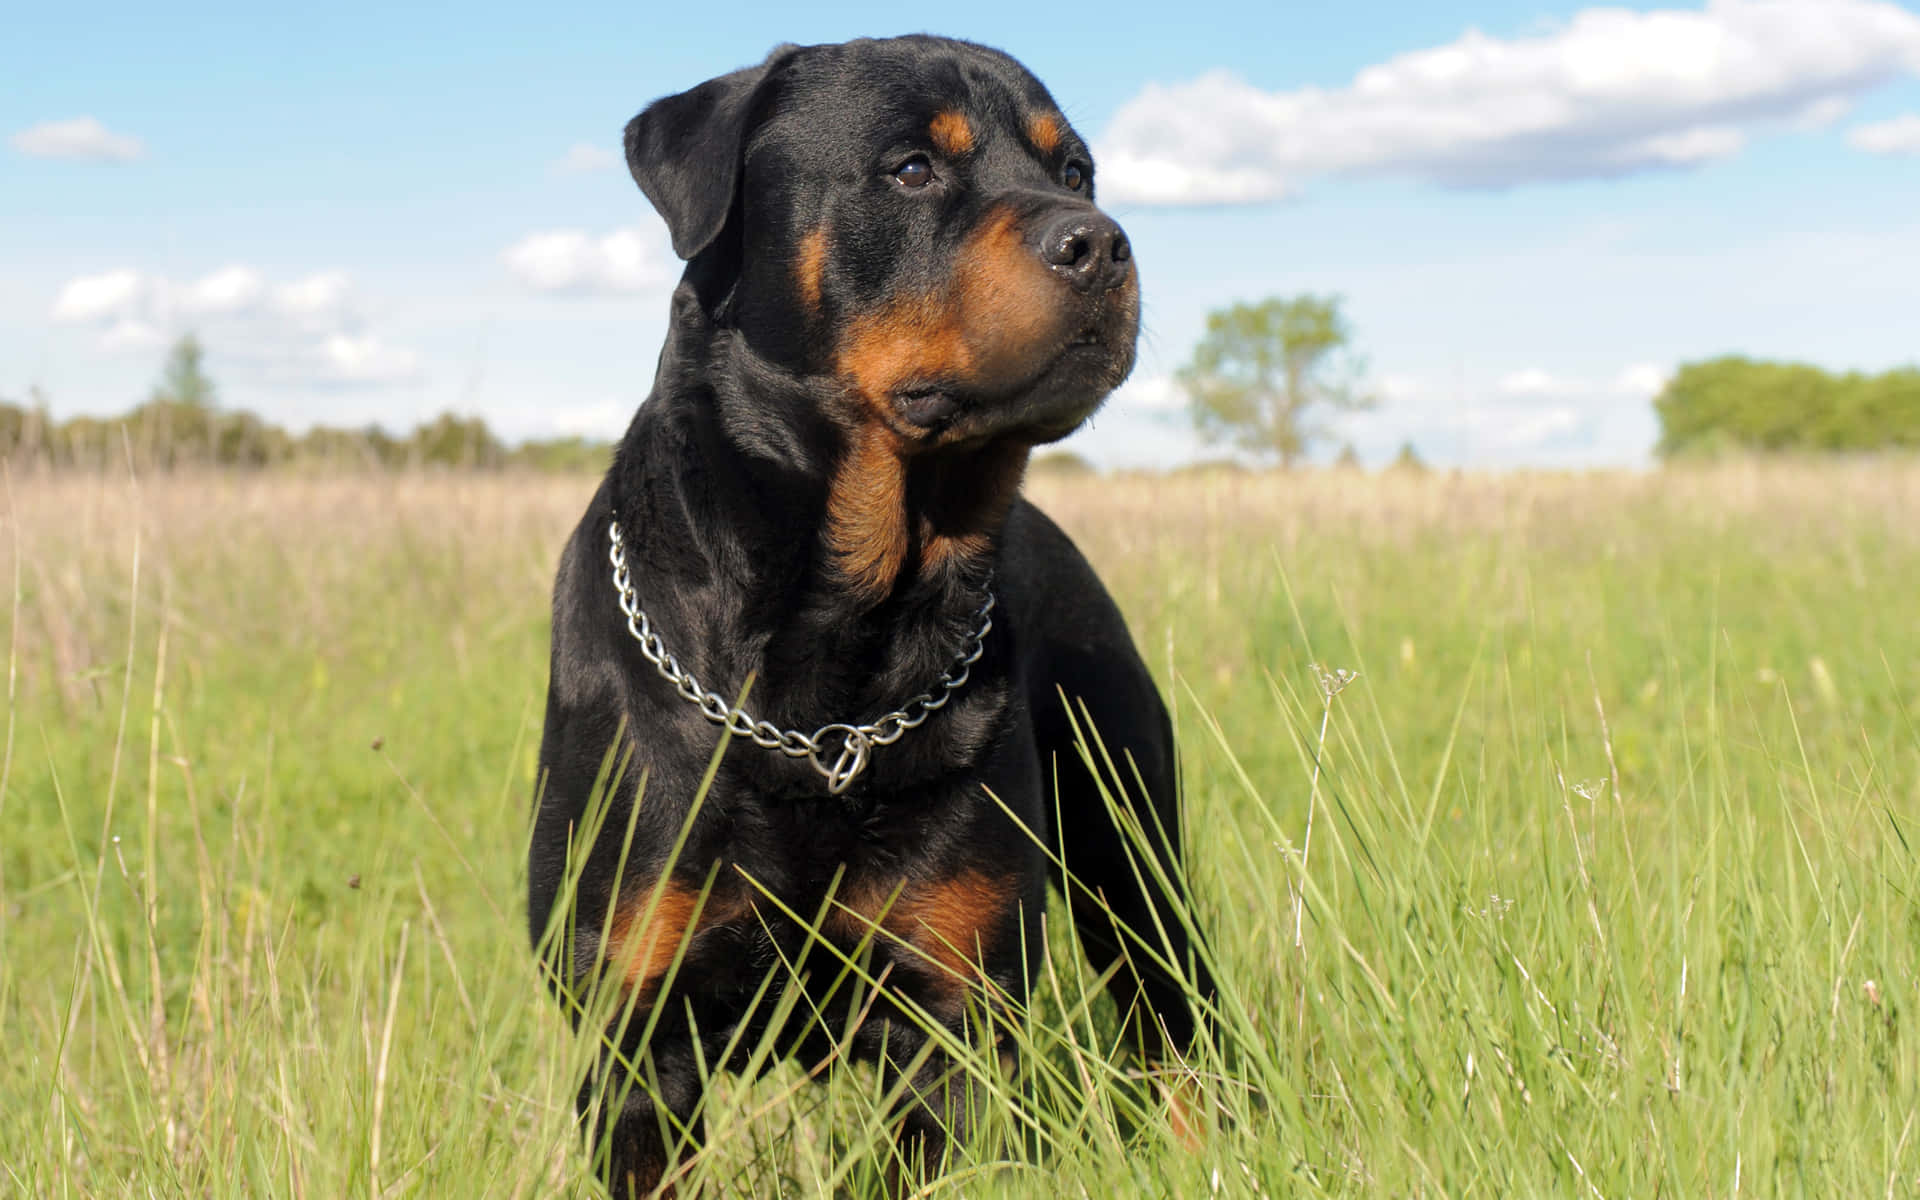 "The noble Rottweiler"